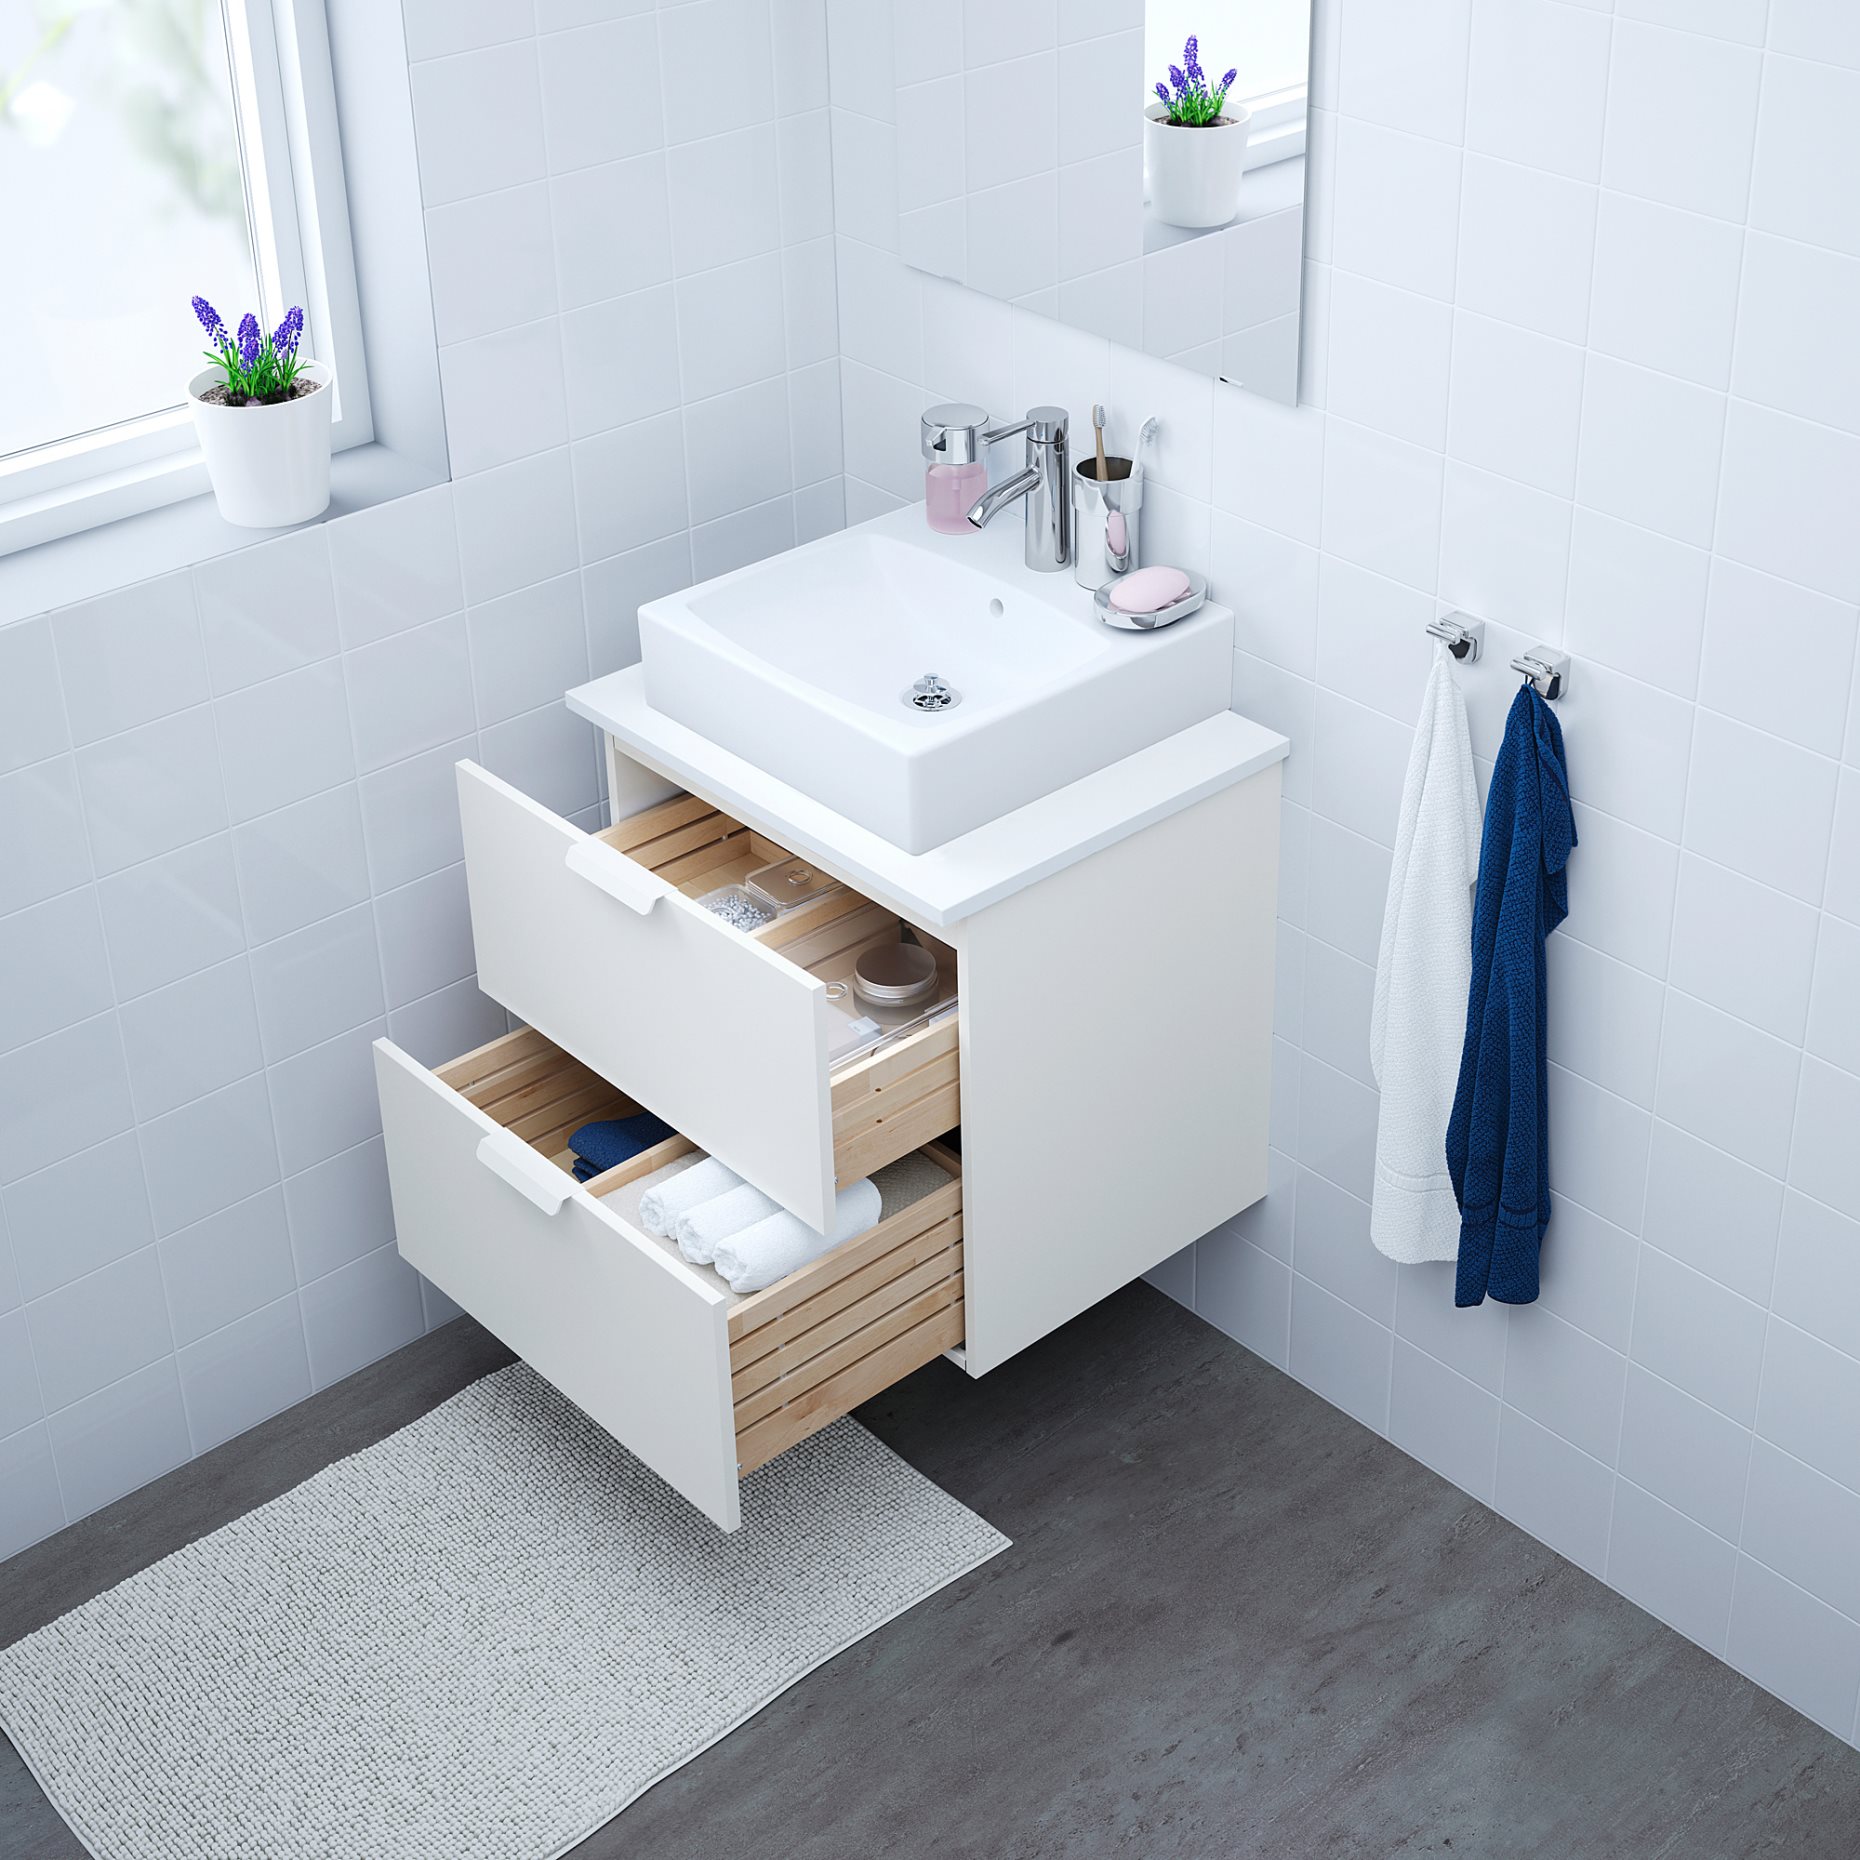 GODMORGON, wash-stand with 2 drawers, 402.811.02